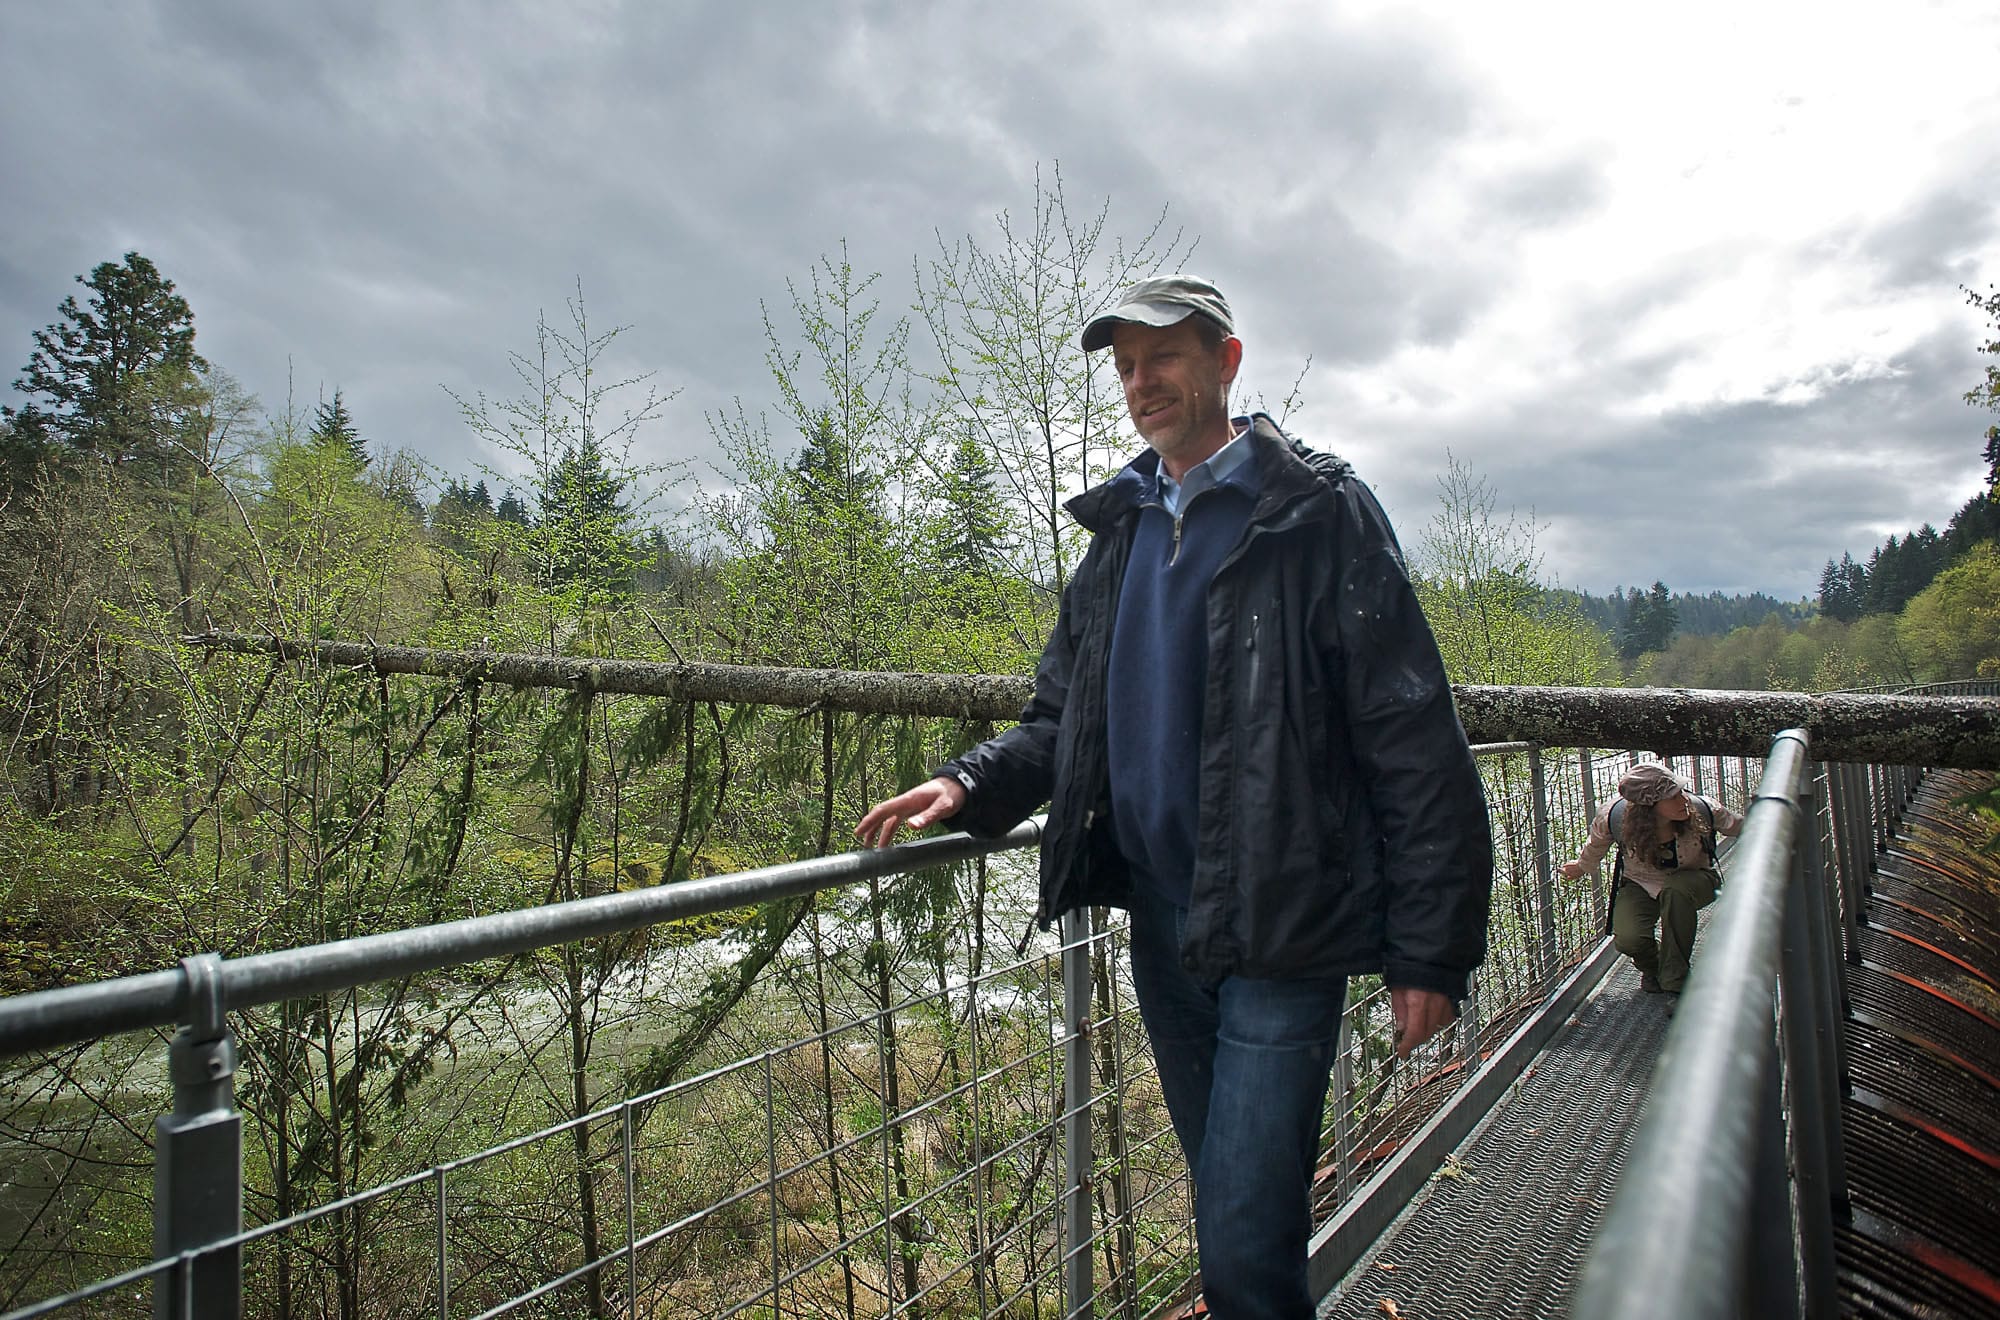 Columbia Land Trust Executive Director Glenn Lamb, foreground, and stewardship lead Kate Conley walk along a pipeline from an old dam on the Hood River in Oregon.